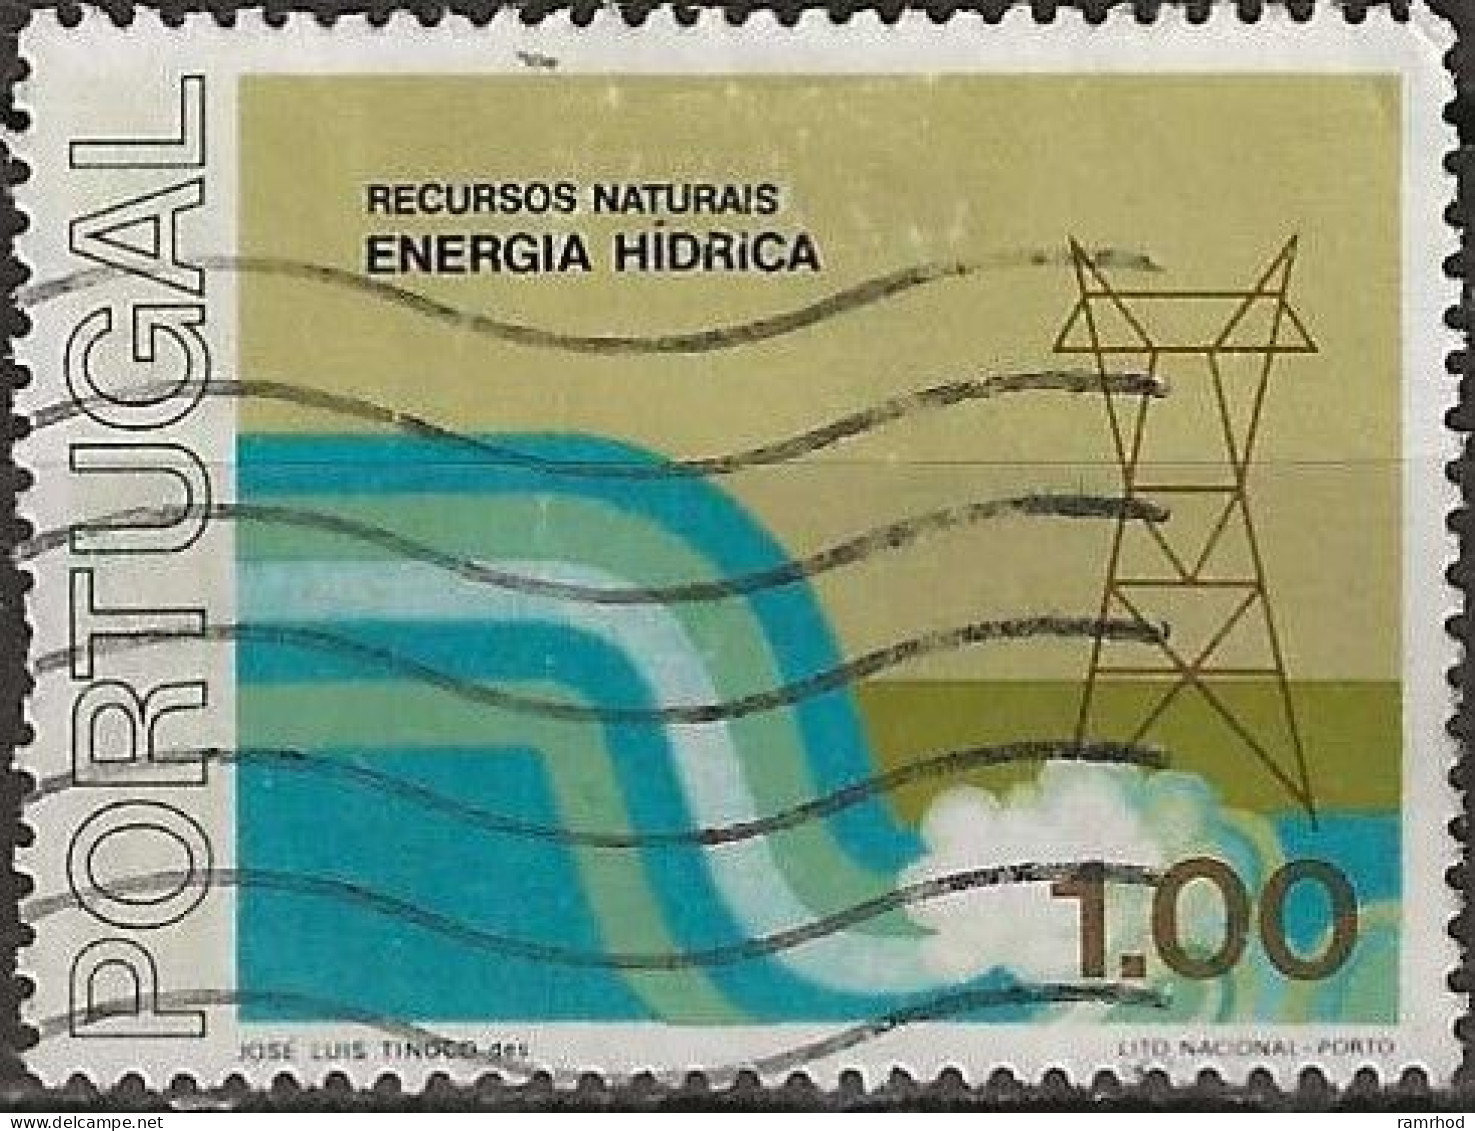 PORTUGAL 1976 Uses Of Natural Energy - 1e Hydroelectric Power FU - Usado